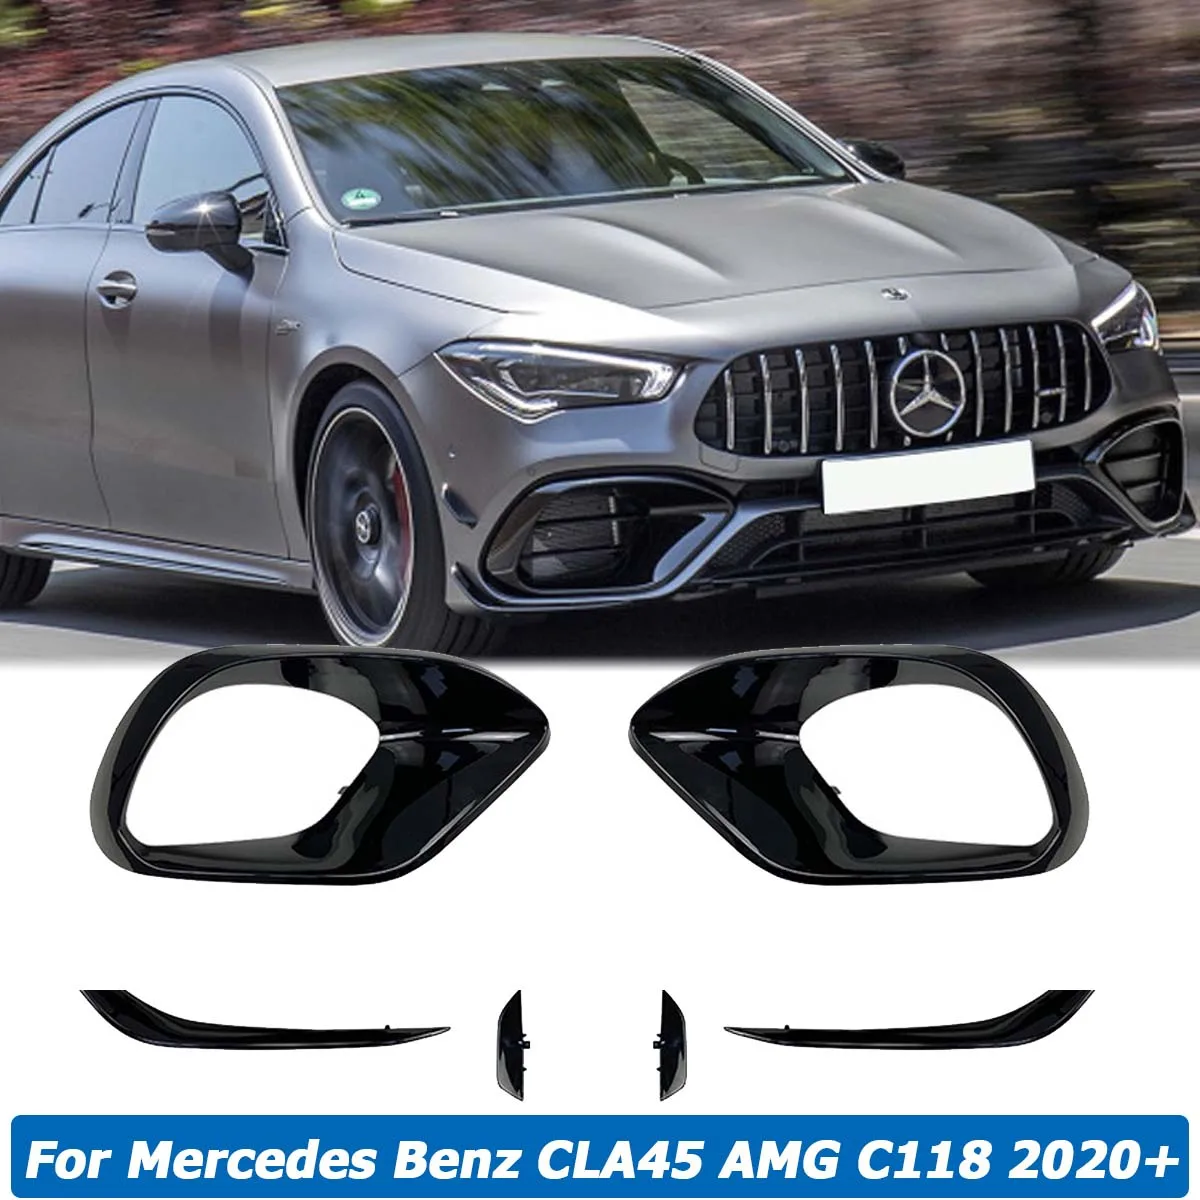 

Front Bumper Grill Air Vent Splitter Cover Body Kit For Mercedes Benz W118 C118 CLA45 AMG 2020-2021 Car Accessories Glossy Black